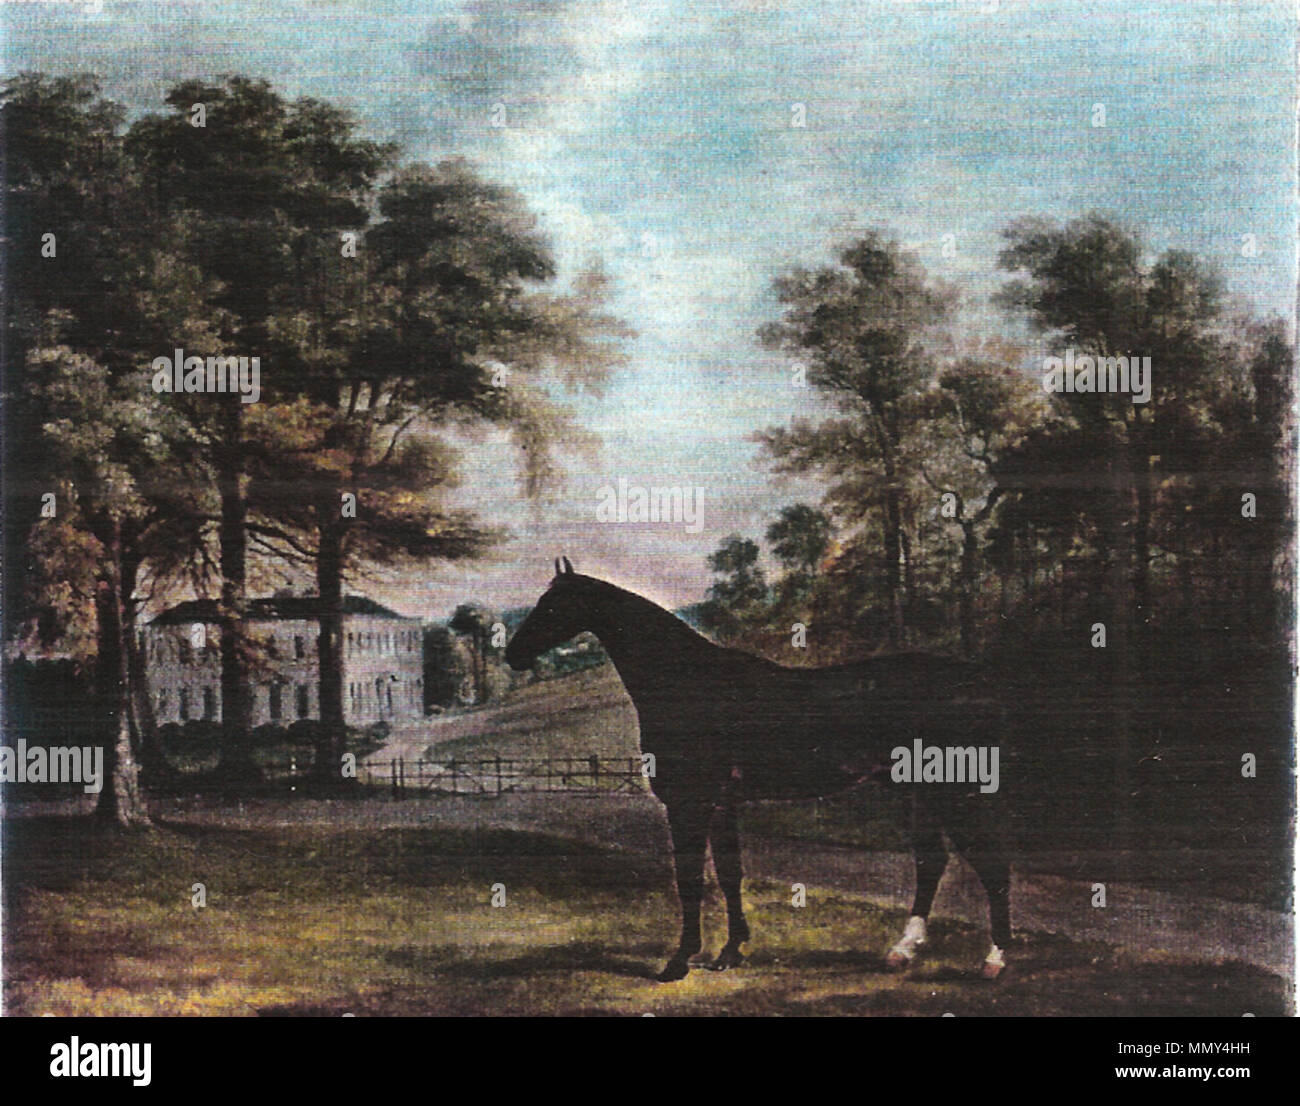 .  English: A horse in a landscape with castlemartin in the background. The property was occupied by the Carter family from 1730 to 1850. A horse in a landscape with castlemartin in the background. The property was occupied by the Carter family from 1730 to 1850 Stock Photo